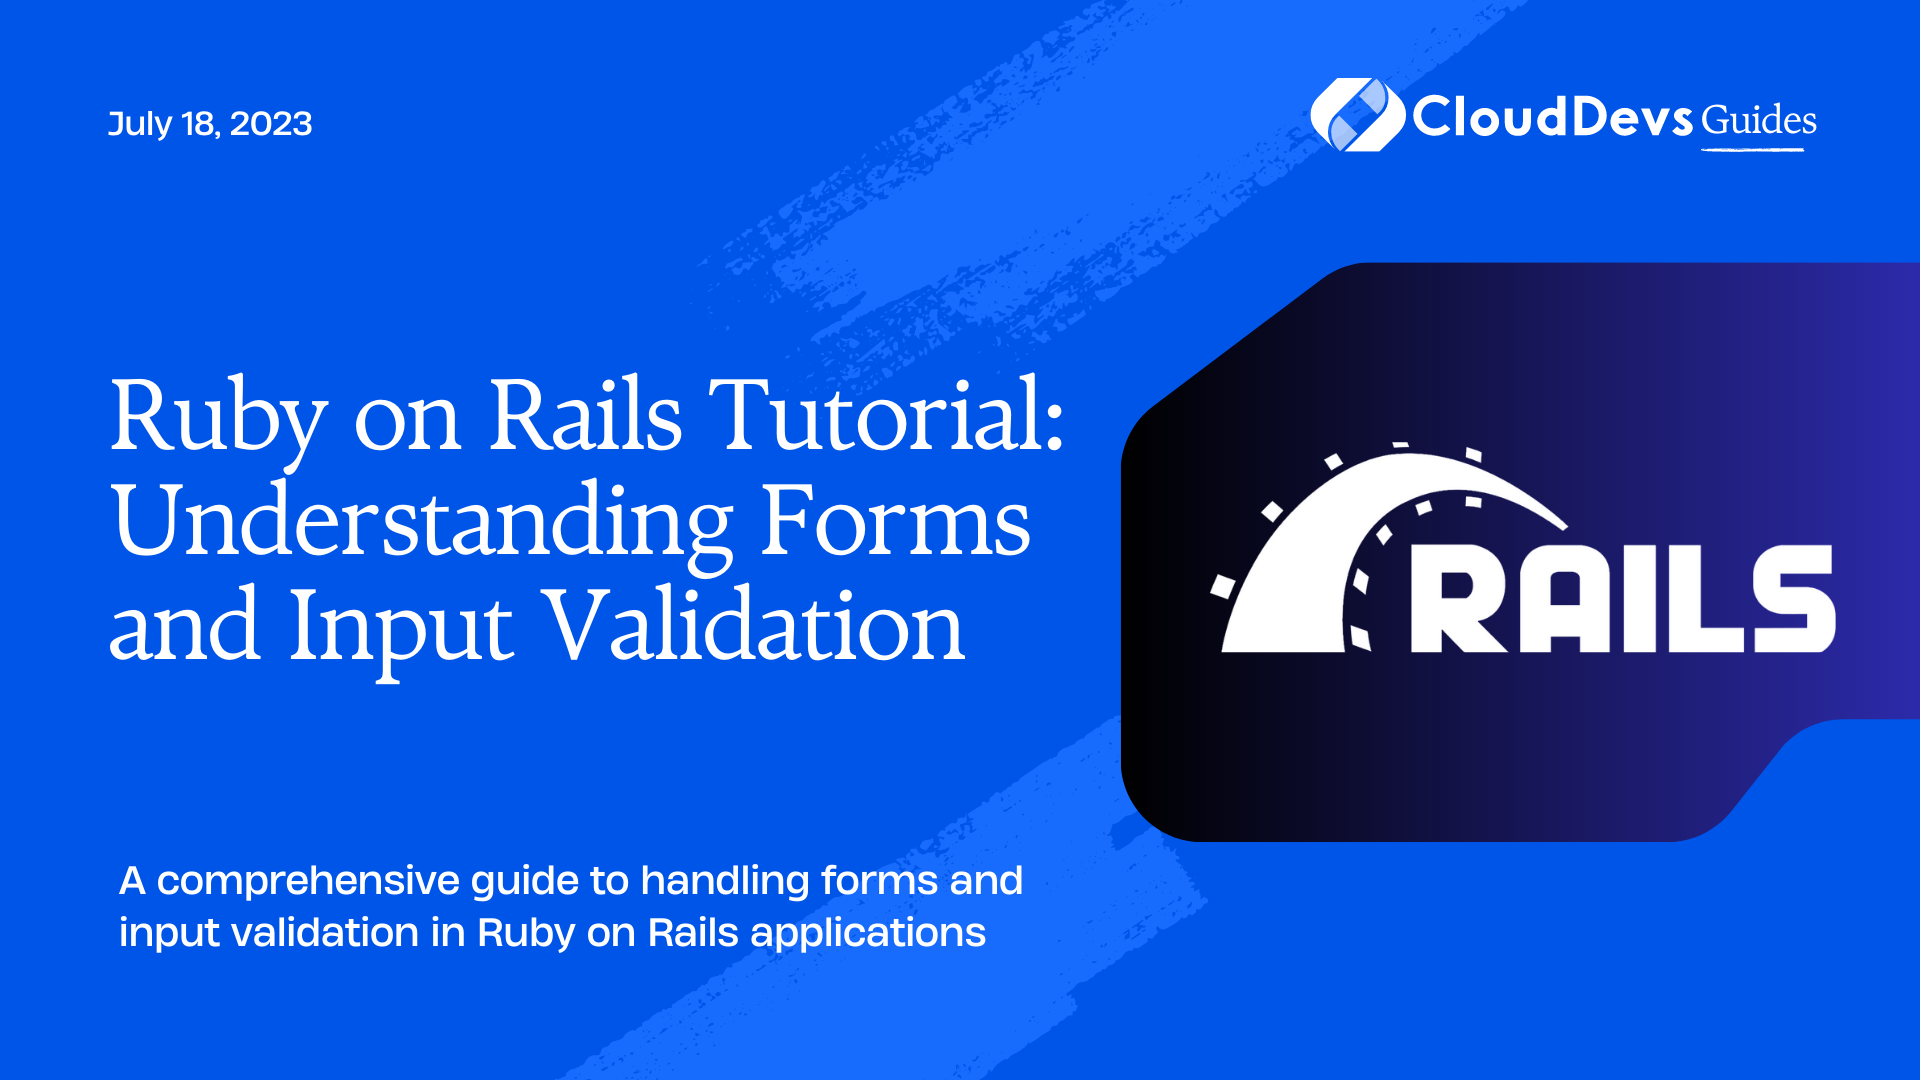 Ruby on Rails Tutorial: Understanding Forms and Input Validation